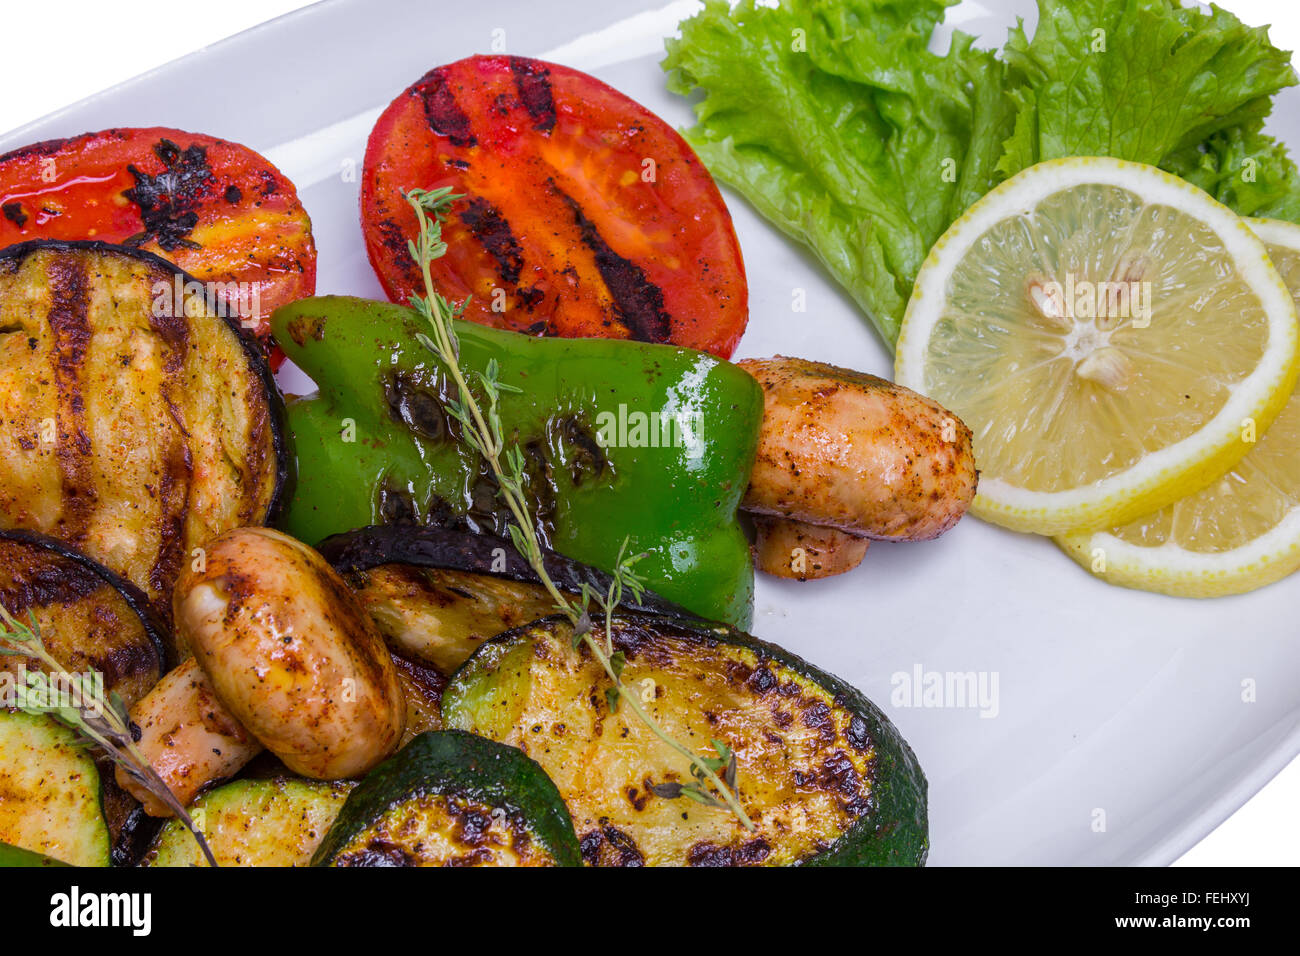 Grilled vegetables on the long white plate, closeup Stock Photo